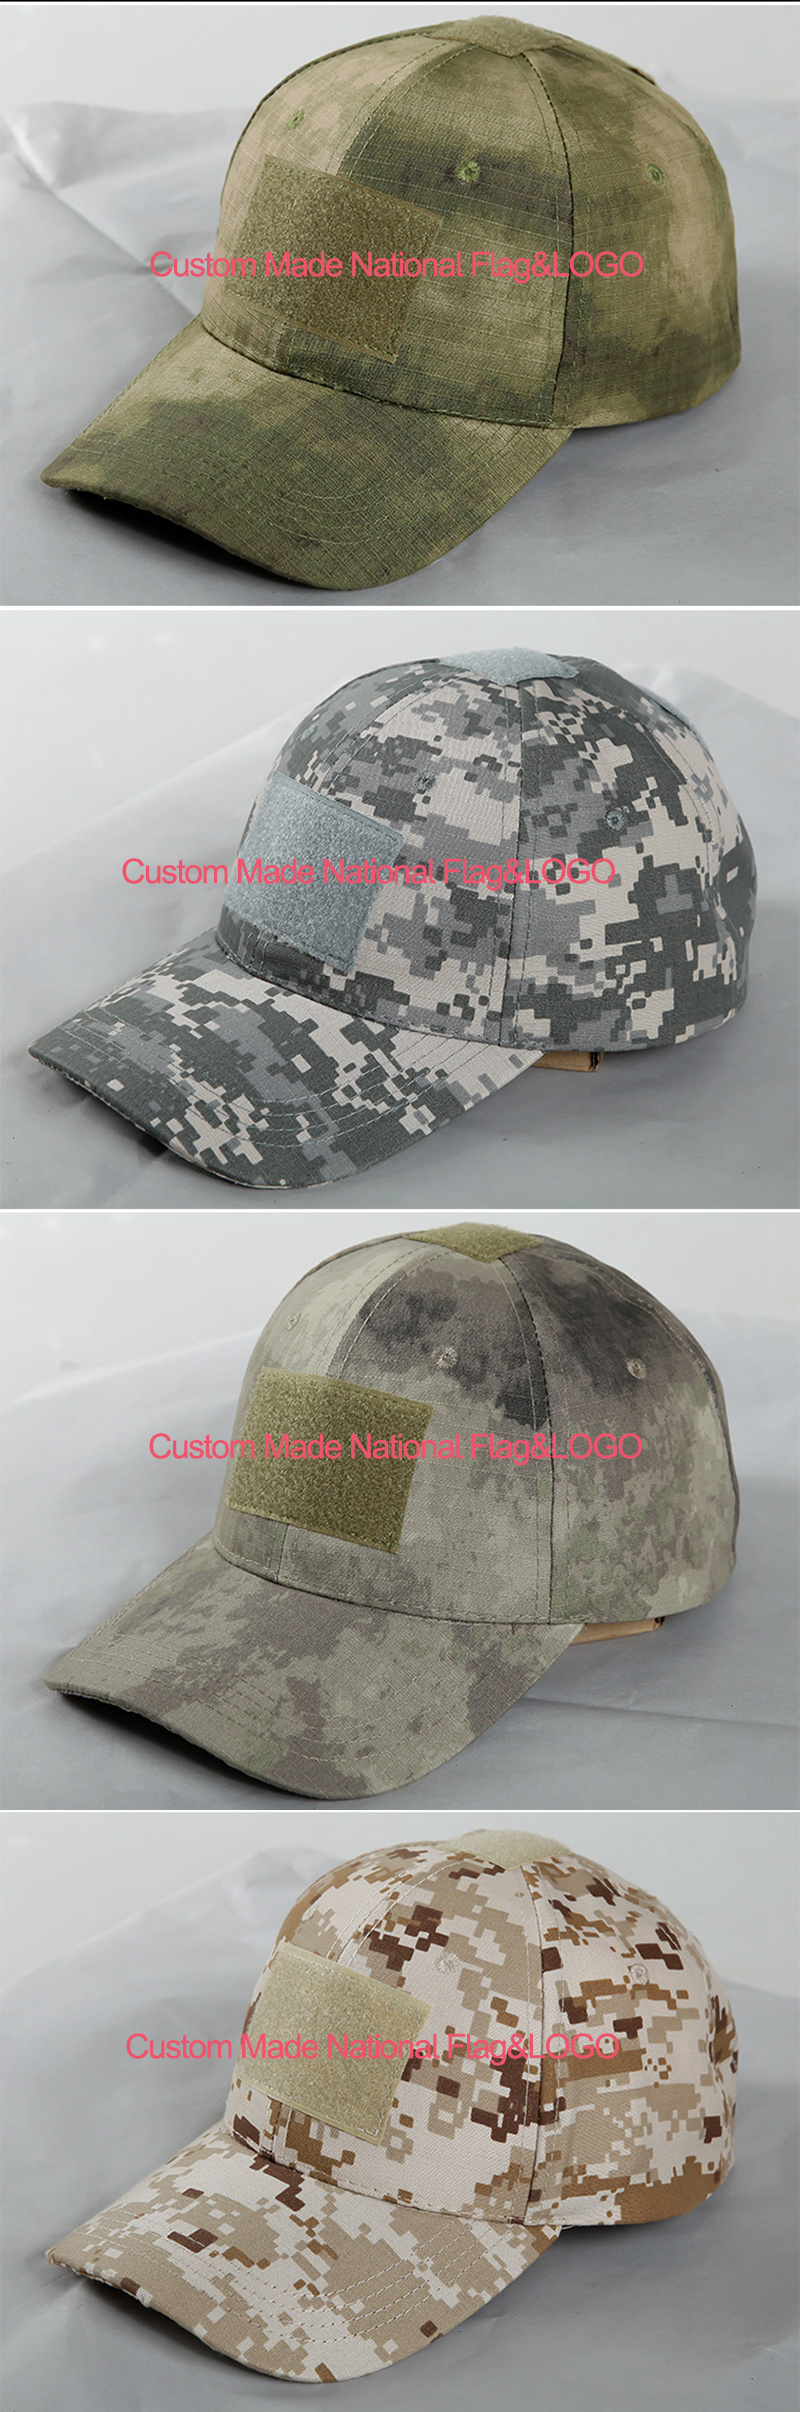 Custom Military Hat Embroidery Patch Vintage Camouflage Caps Desert Camo Baseball Cap